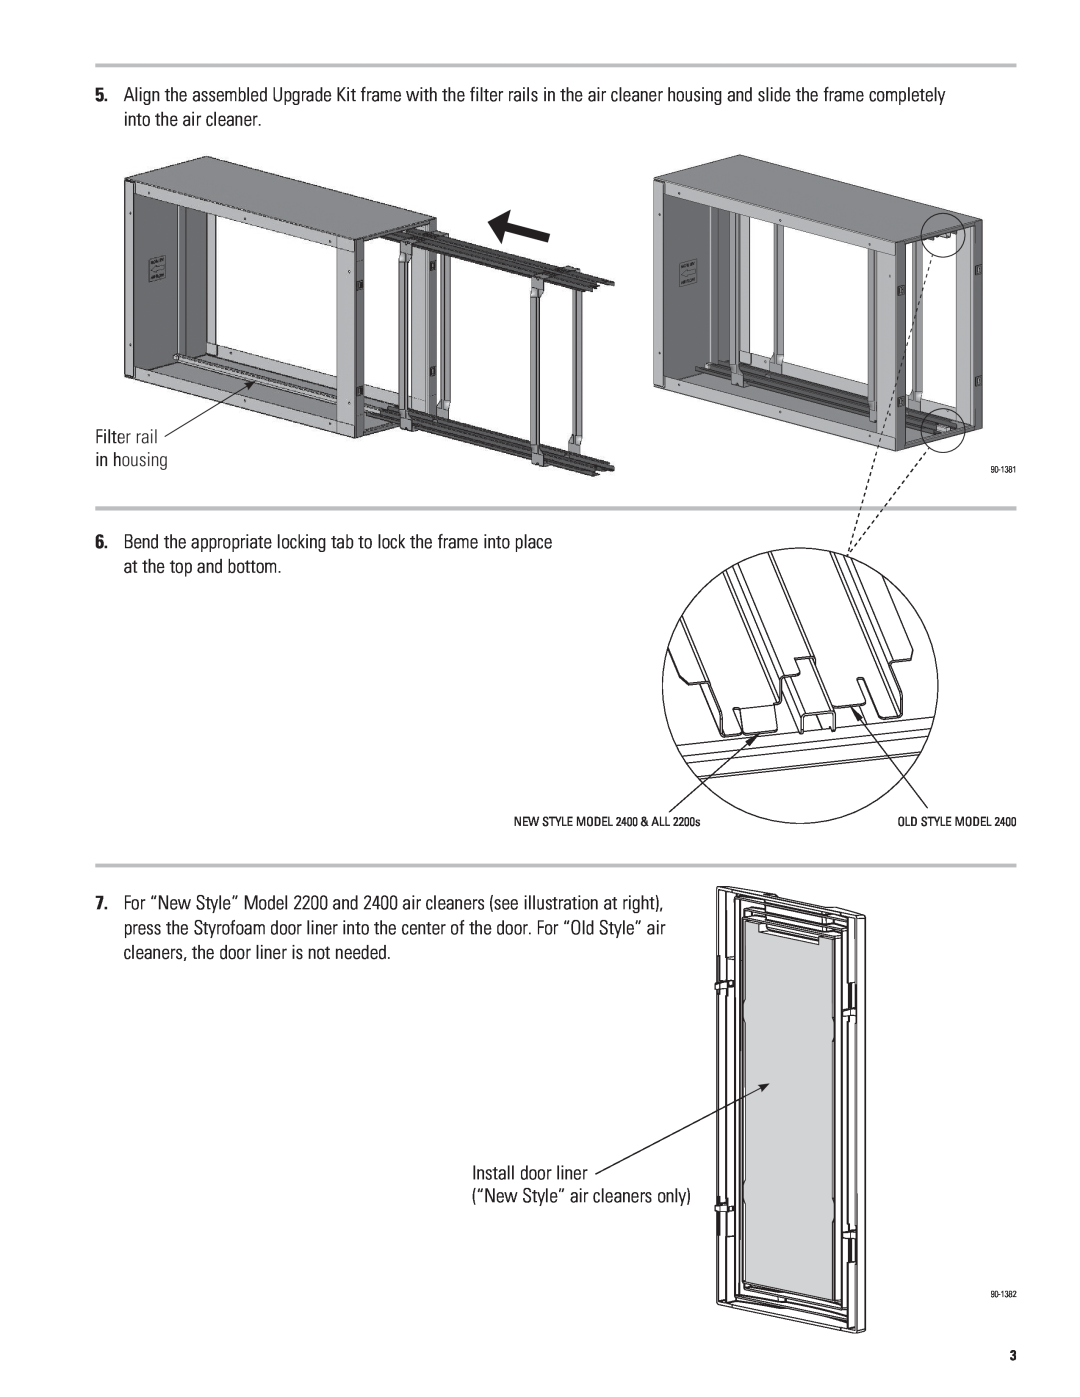 Aprilaire 1213, 1413 installation instructions Install door liner “New Style” air cleaners only 